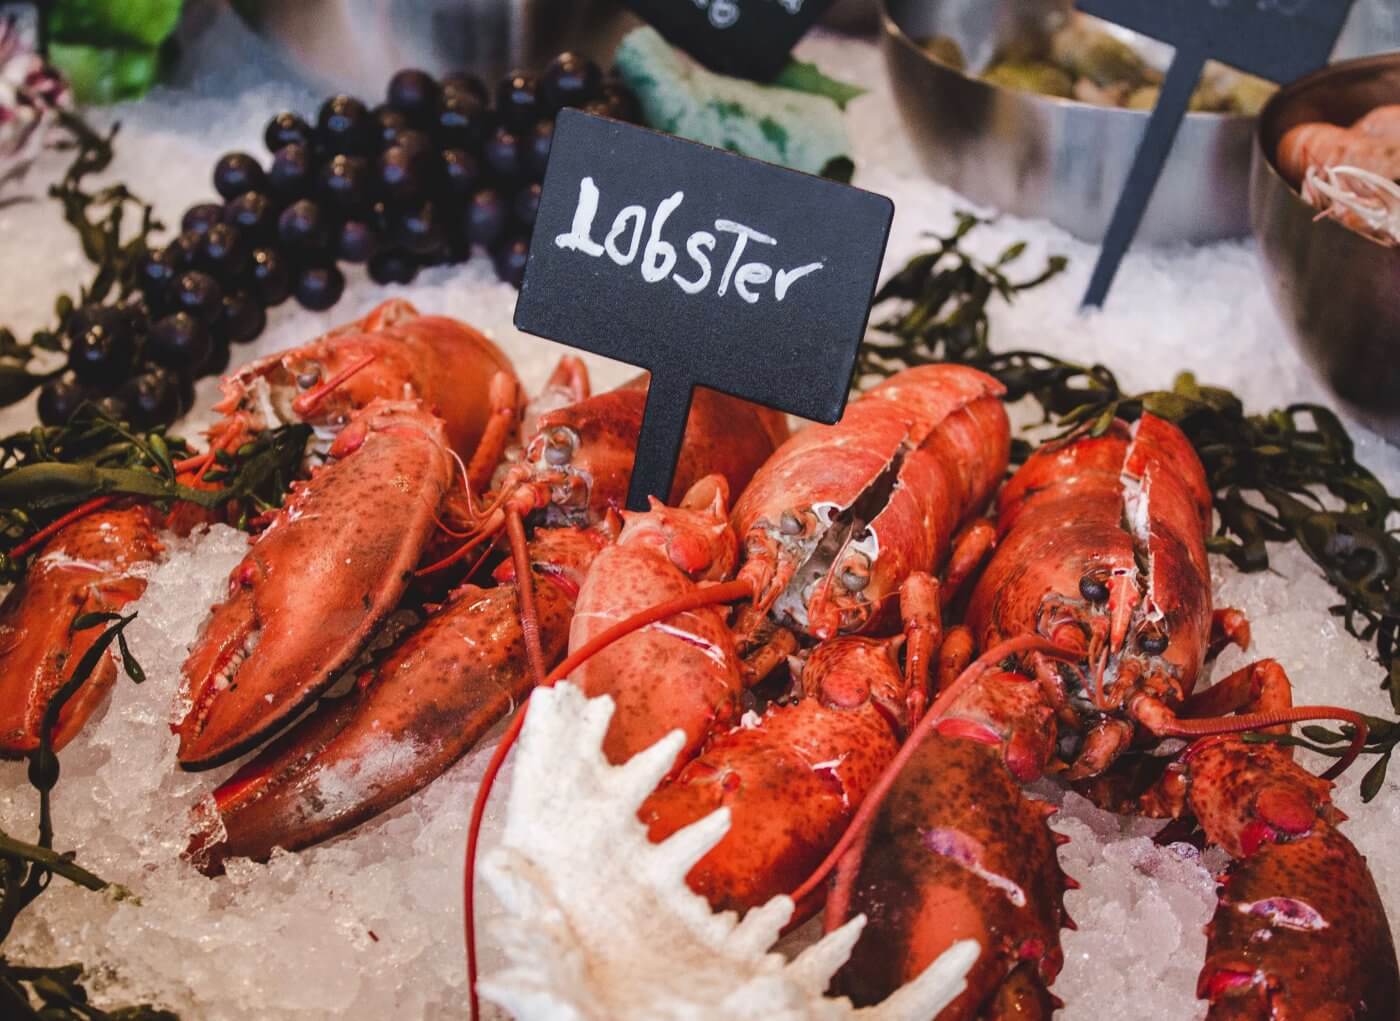 Lobster | The Mustcard